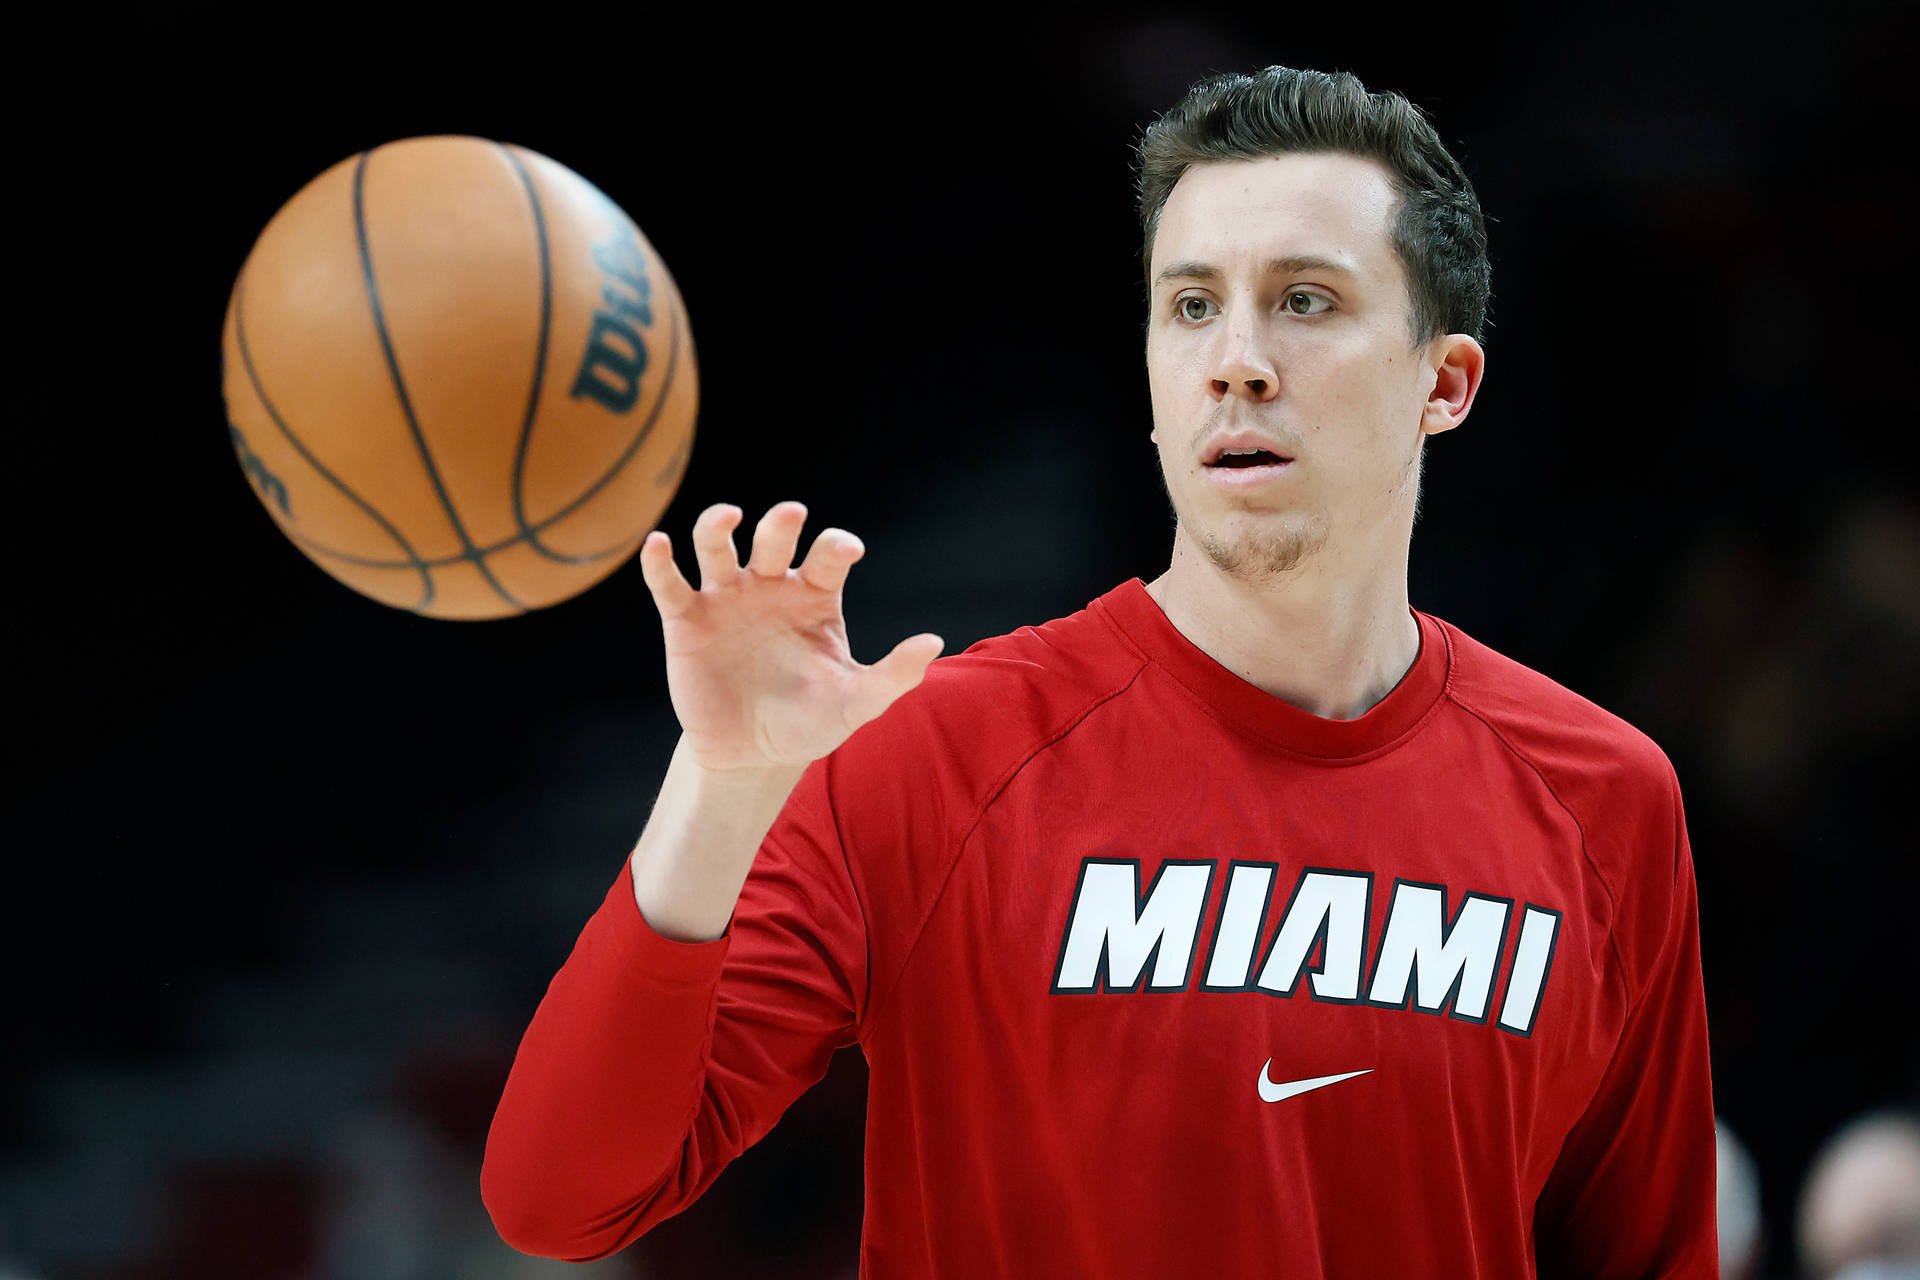 Duncan Robinson In Sleeve Miami Jersey